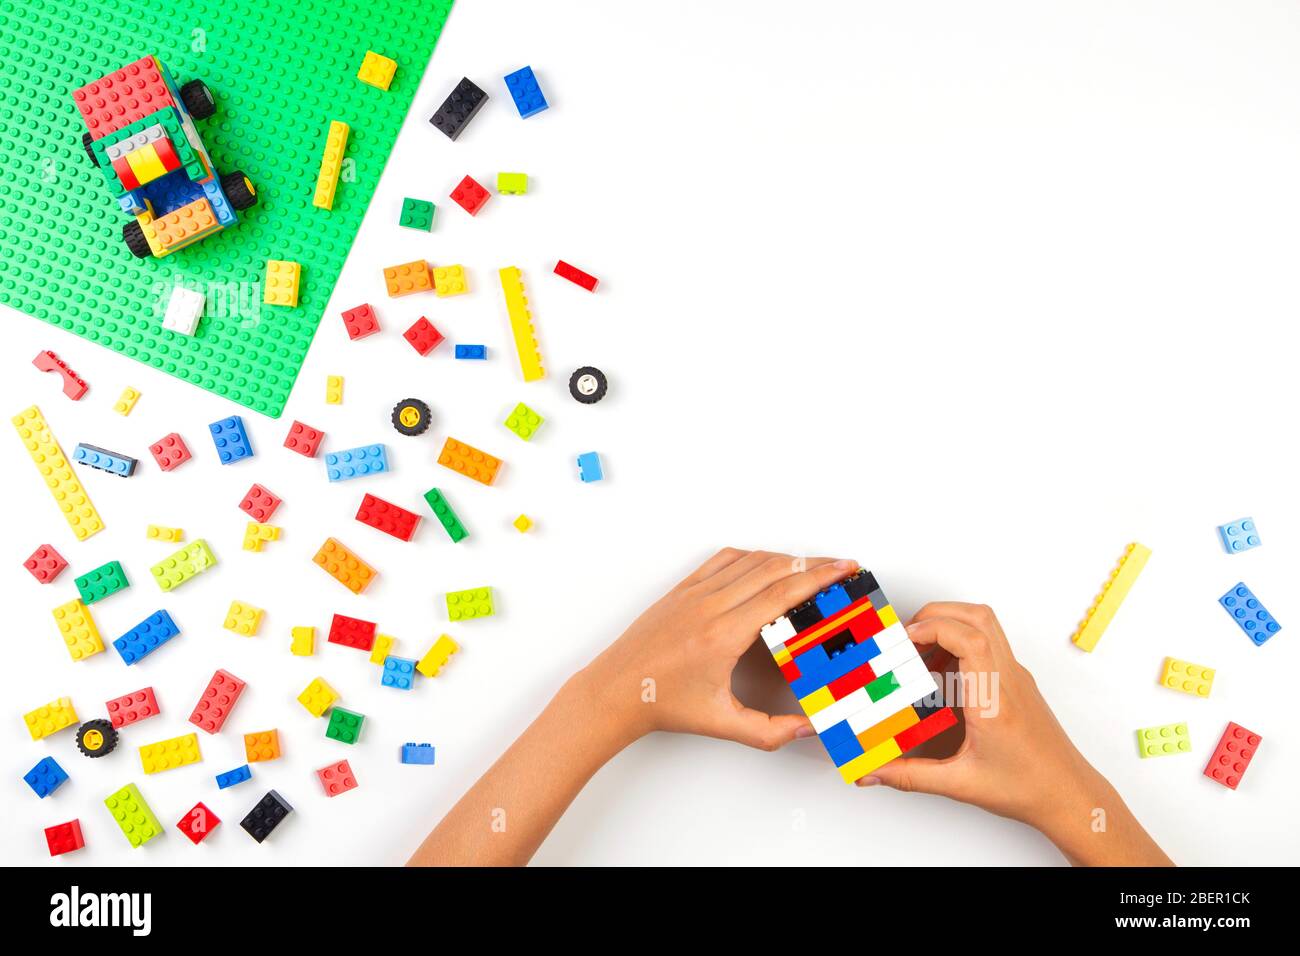 Vilnius, Lithuania - 17 August, 2019: Child hands playing with colorful Lego  bricks blocks on white table Stock Photo - Alamy